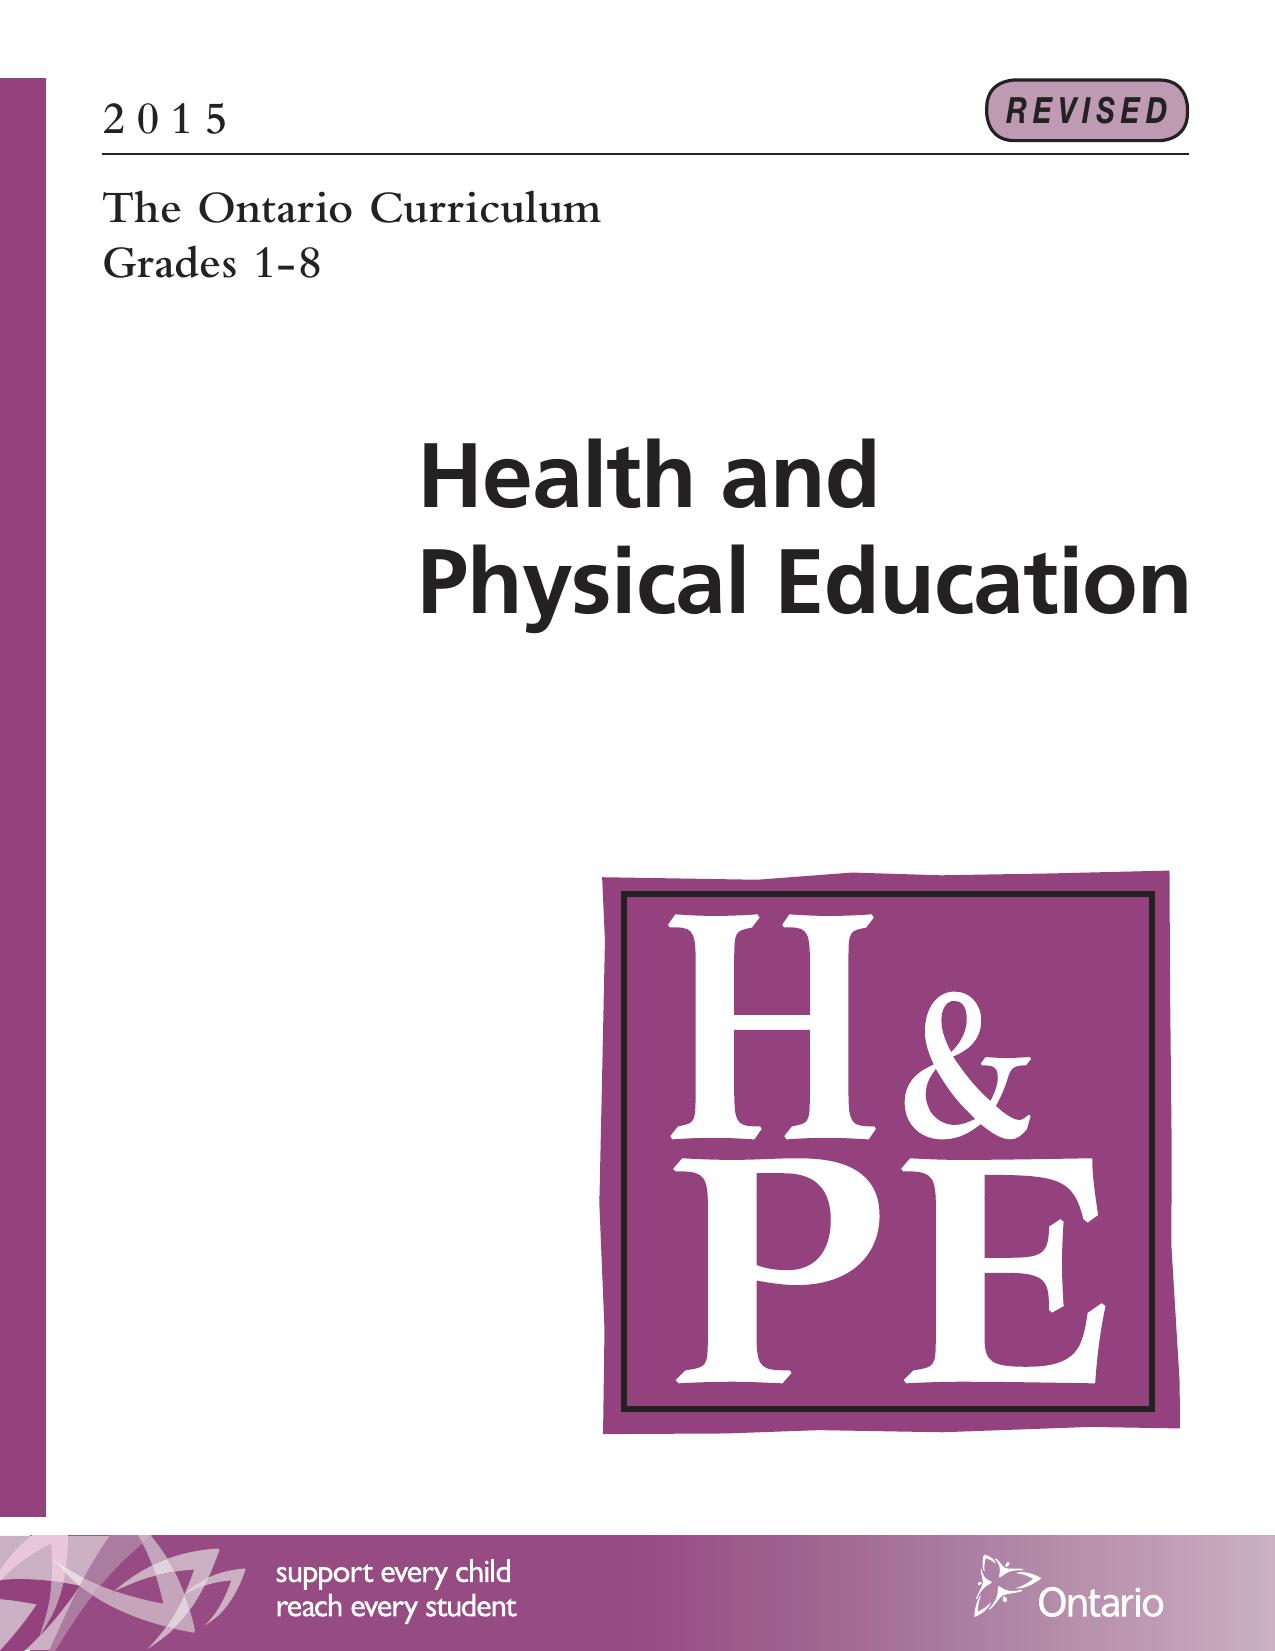 The Ontario Curriculum, Grades 1-8: Health and Physical Education, 2015 - revised